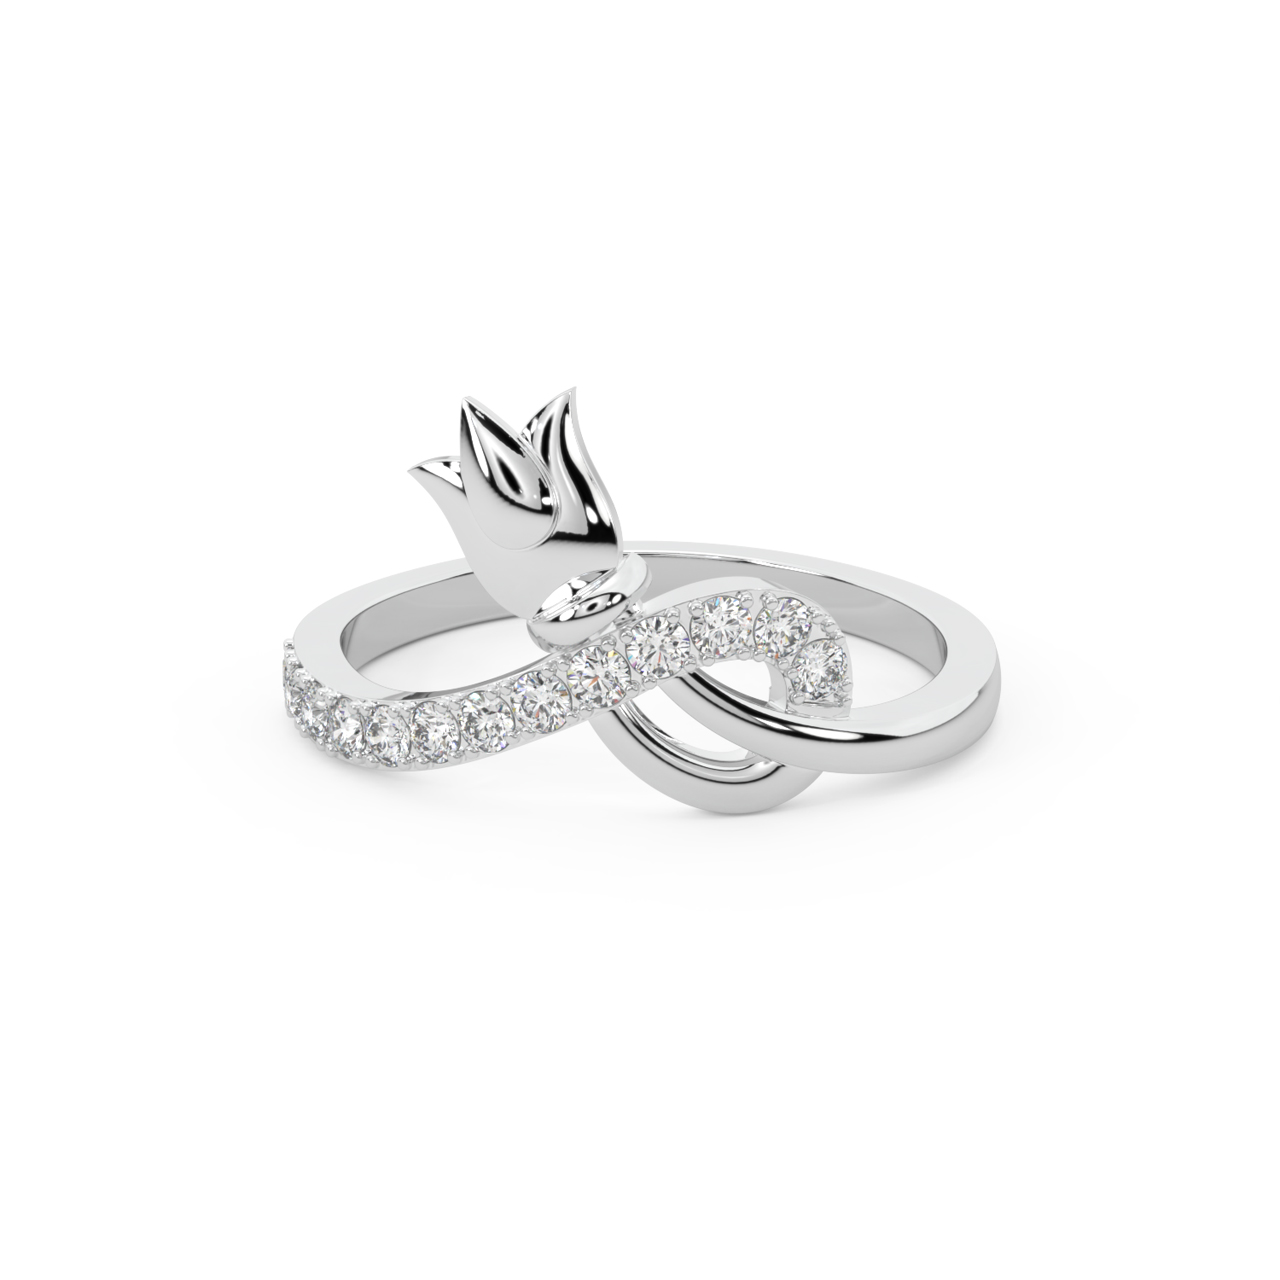 Knot Design Engagement Ring